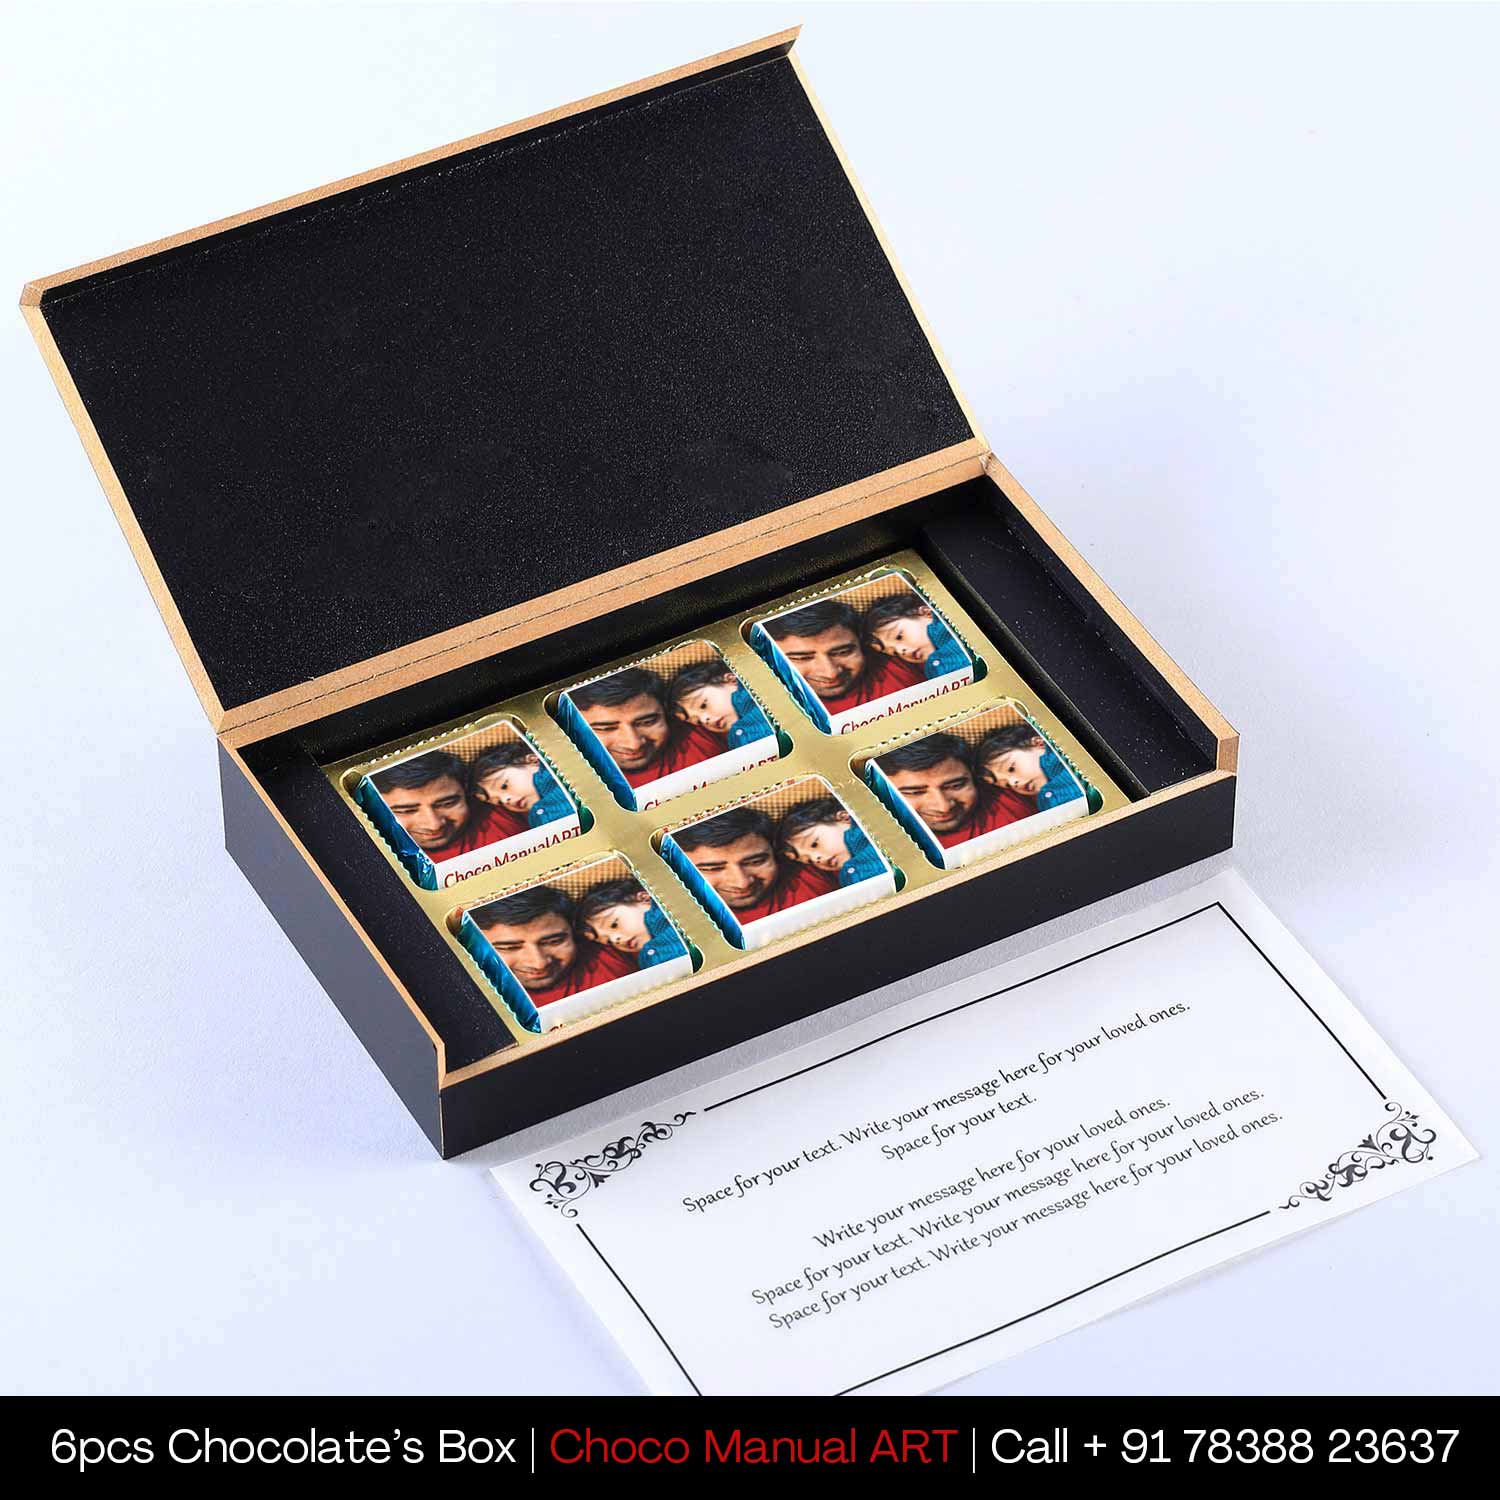 Dad-Son love Depicted Printed Wrapped Chocolates